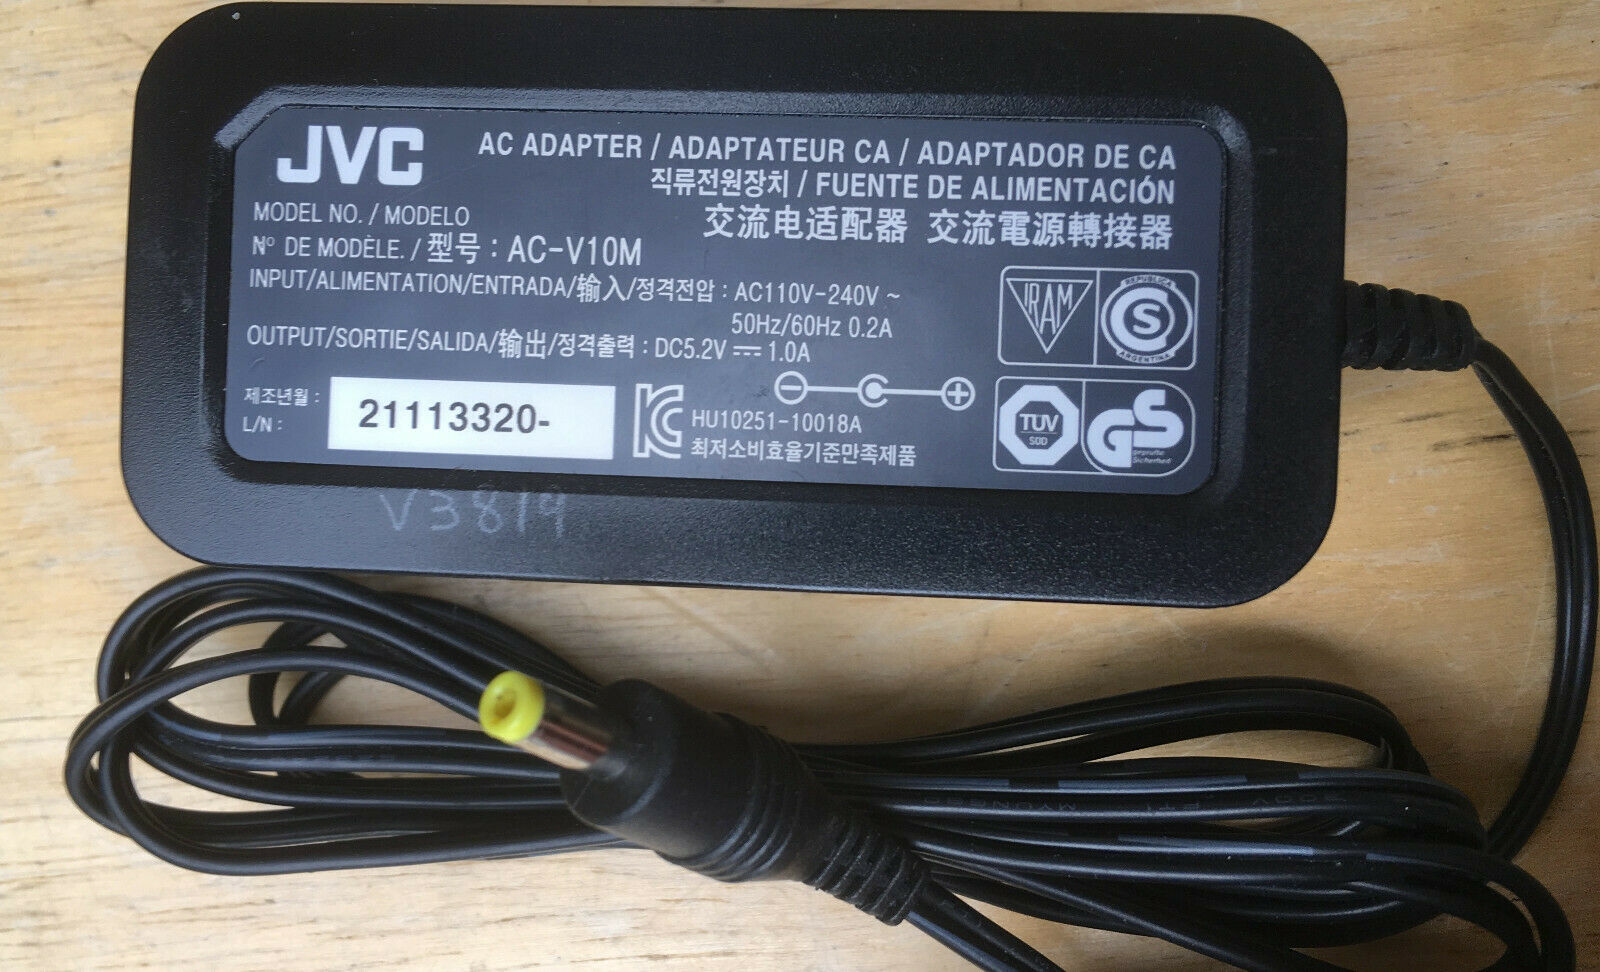 New JVC 5.2v 1A AC-V10M AC-V10 AC-V10U Adapter for JVC Everio Camcorders GZ-HM445